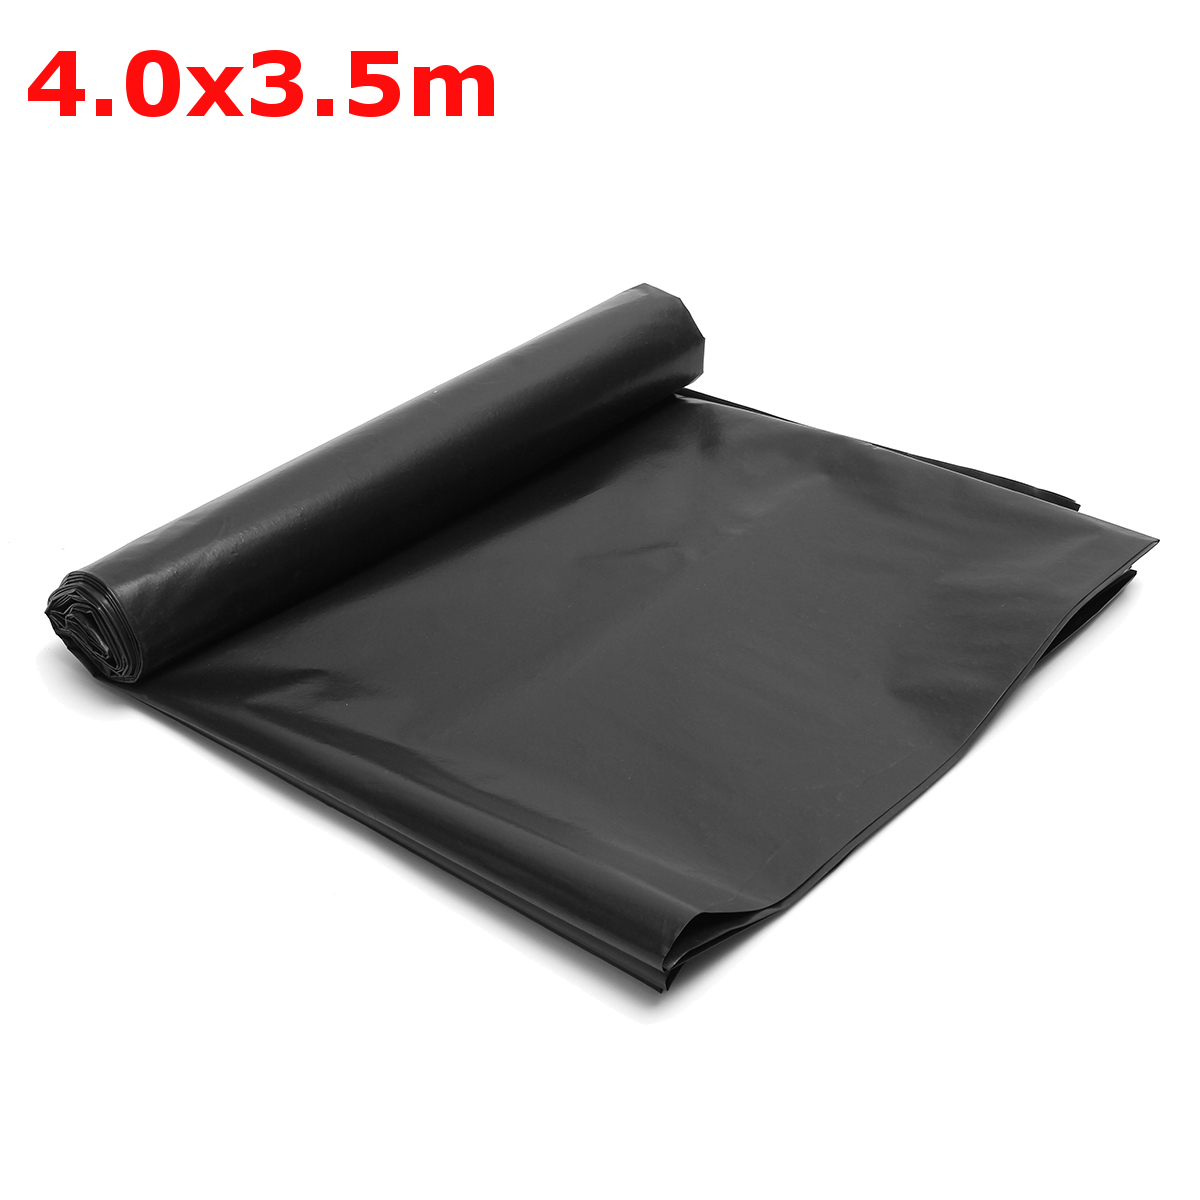 4 Size Black Fish Pond Liner Cloth Home Garden Pool Reinforced HDPE Heavy Landscaping Pool Pond Waterproof Liner Cloth New